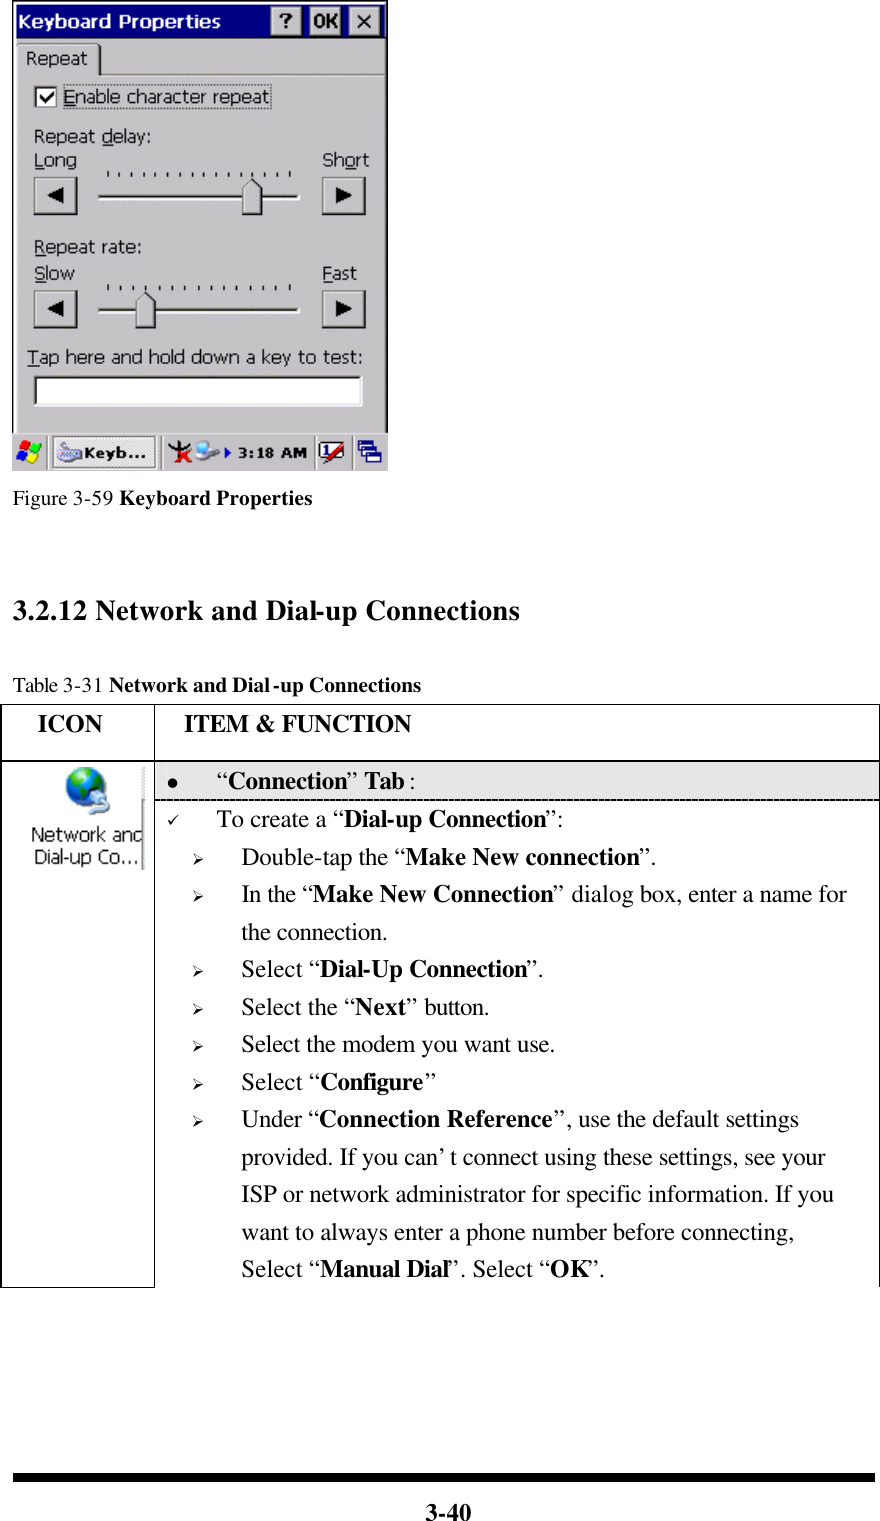  3-40  Figure 3-59 Keyboard Properties   3.2.12 Network and Dial-up Connections  Table 3-31 Network and Dial-up Connections   ICON  ITEM &amp; FUNCTION l “Connection” Tab :    ü To create a “Dial-up Connection”: Ø Double-tap the “Make New connection”. Ø In the “Make New Connection” dialog box, enter a name for the connection. Ø Select “Dial-Up Connection”. Ø Select the “Next” button. Ø Select the modem you want use. Ø Select “Configure” Ø Under “Connection Reference”, use the default settings provided. If you can’t connect using these settings, see your ISP or network administrator for specific information. If you want to always enter a phone number before connecting, Select “Manual Dial”. Select “OK”. 